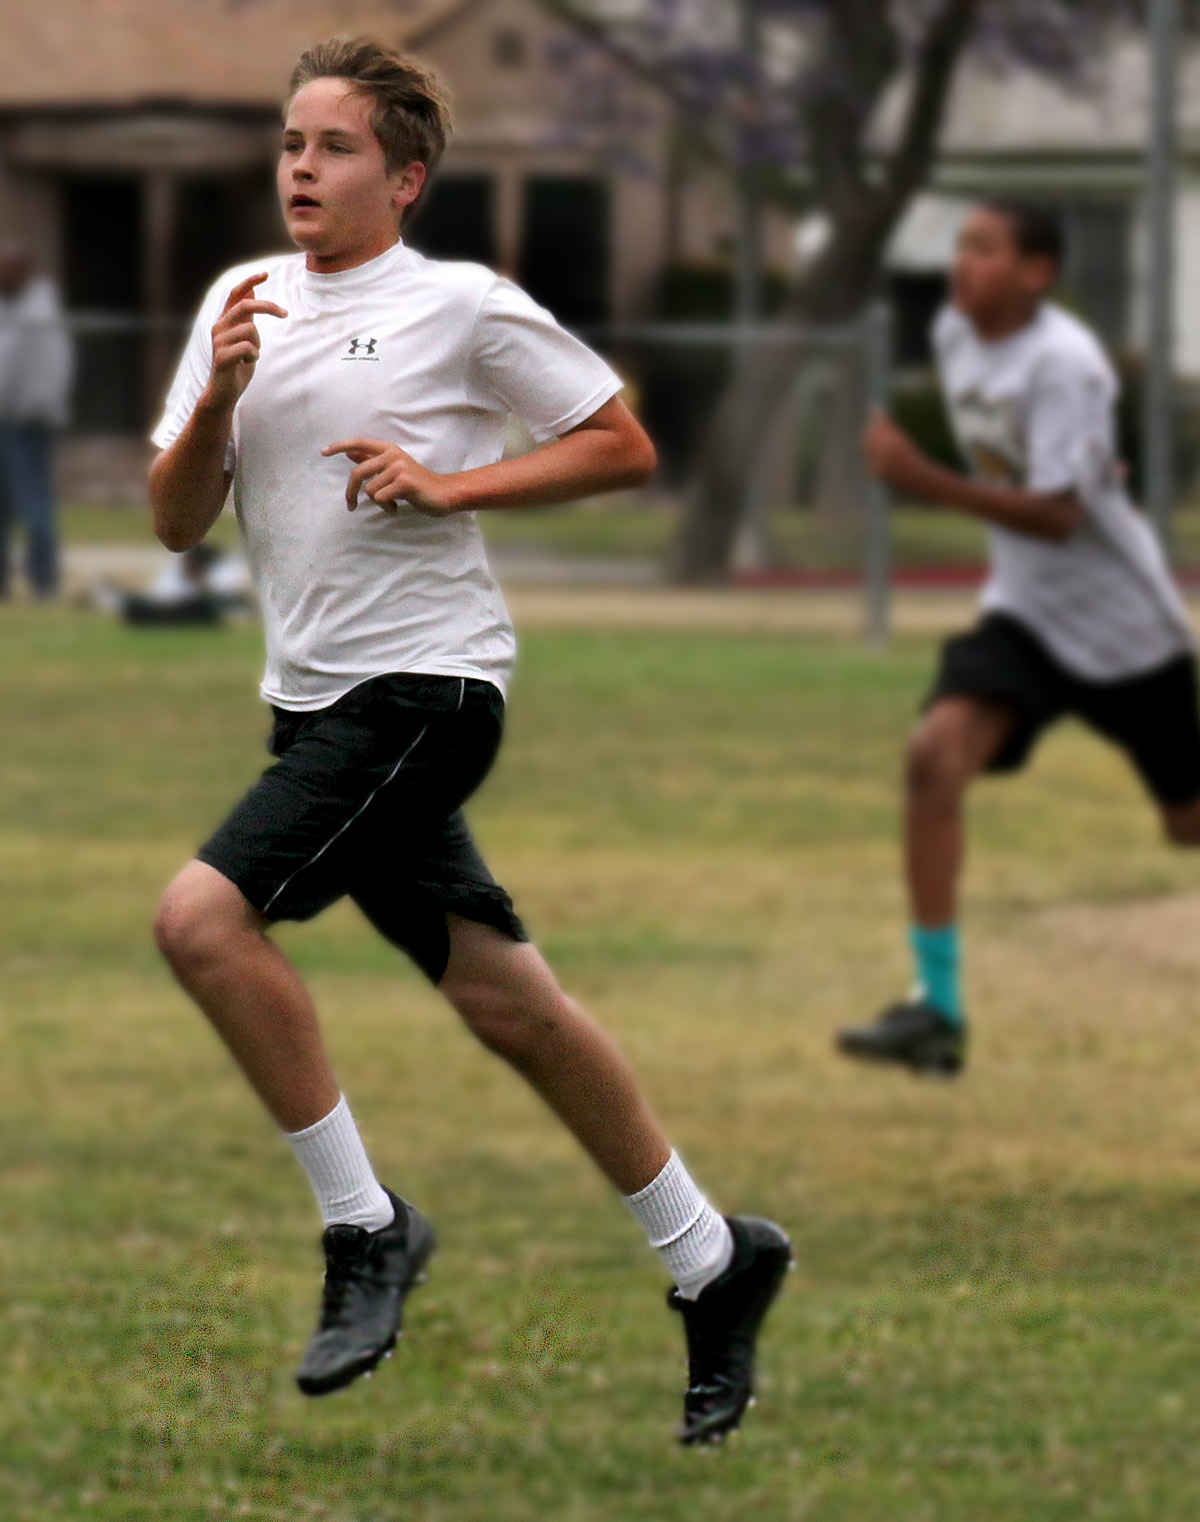 Jack Graham trains for his tackle football team on June 11, 2011. Jack is his team's quarterback and the Fall 2011 season will be his 4th year in youth league football.